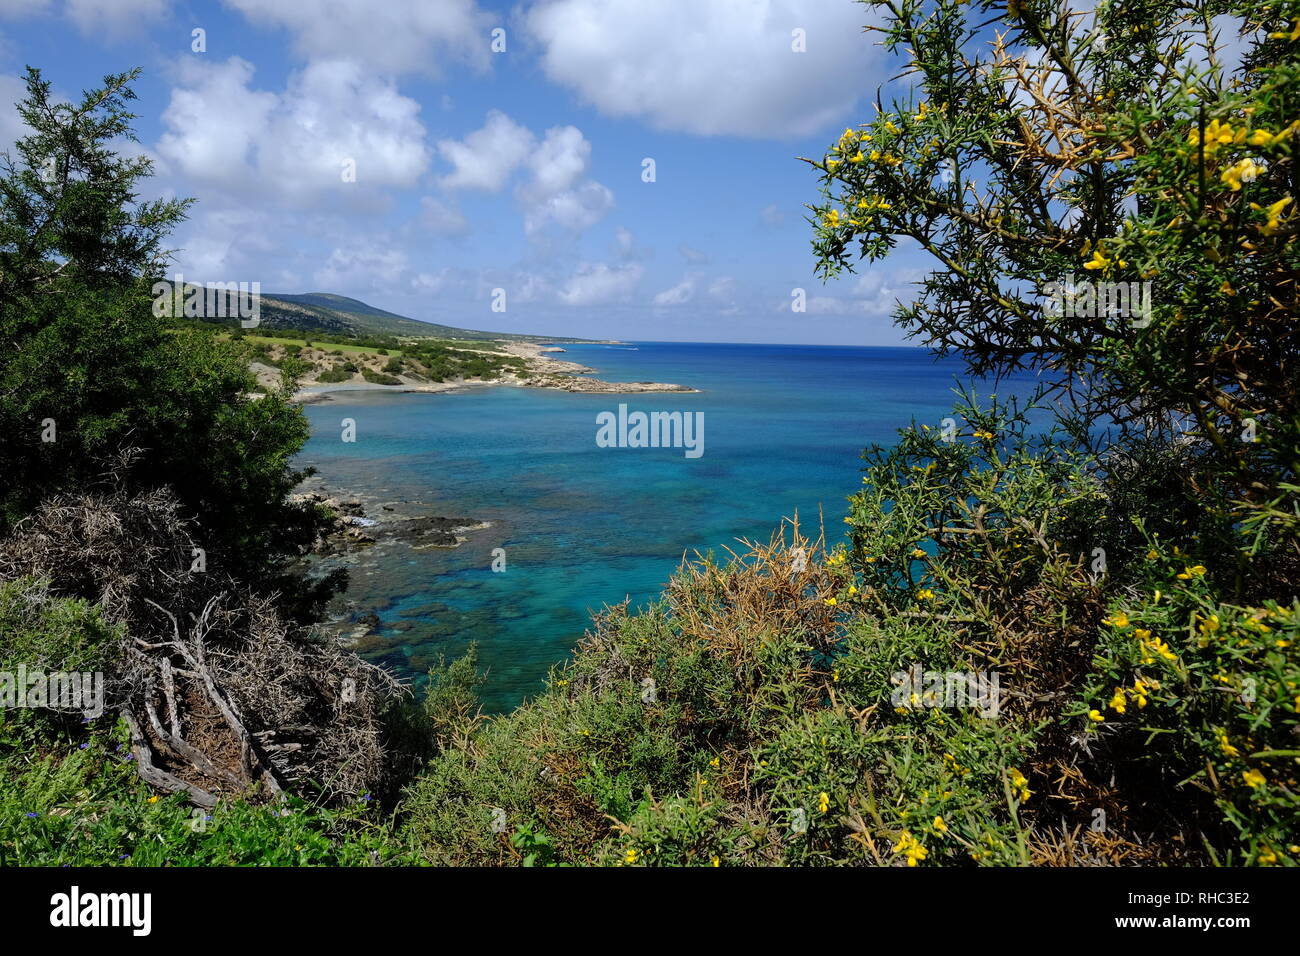 View of the beaches and lagoons on the Cyprus northern coastline, near the Baths of Aphrodite, Cyprus, Greece Stock Photo